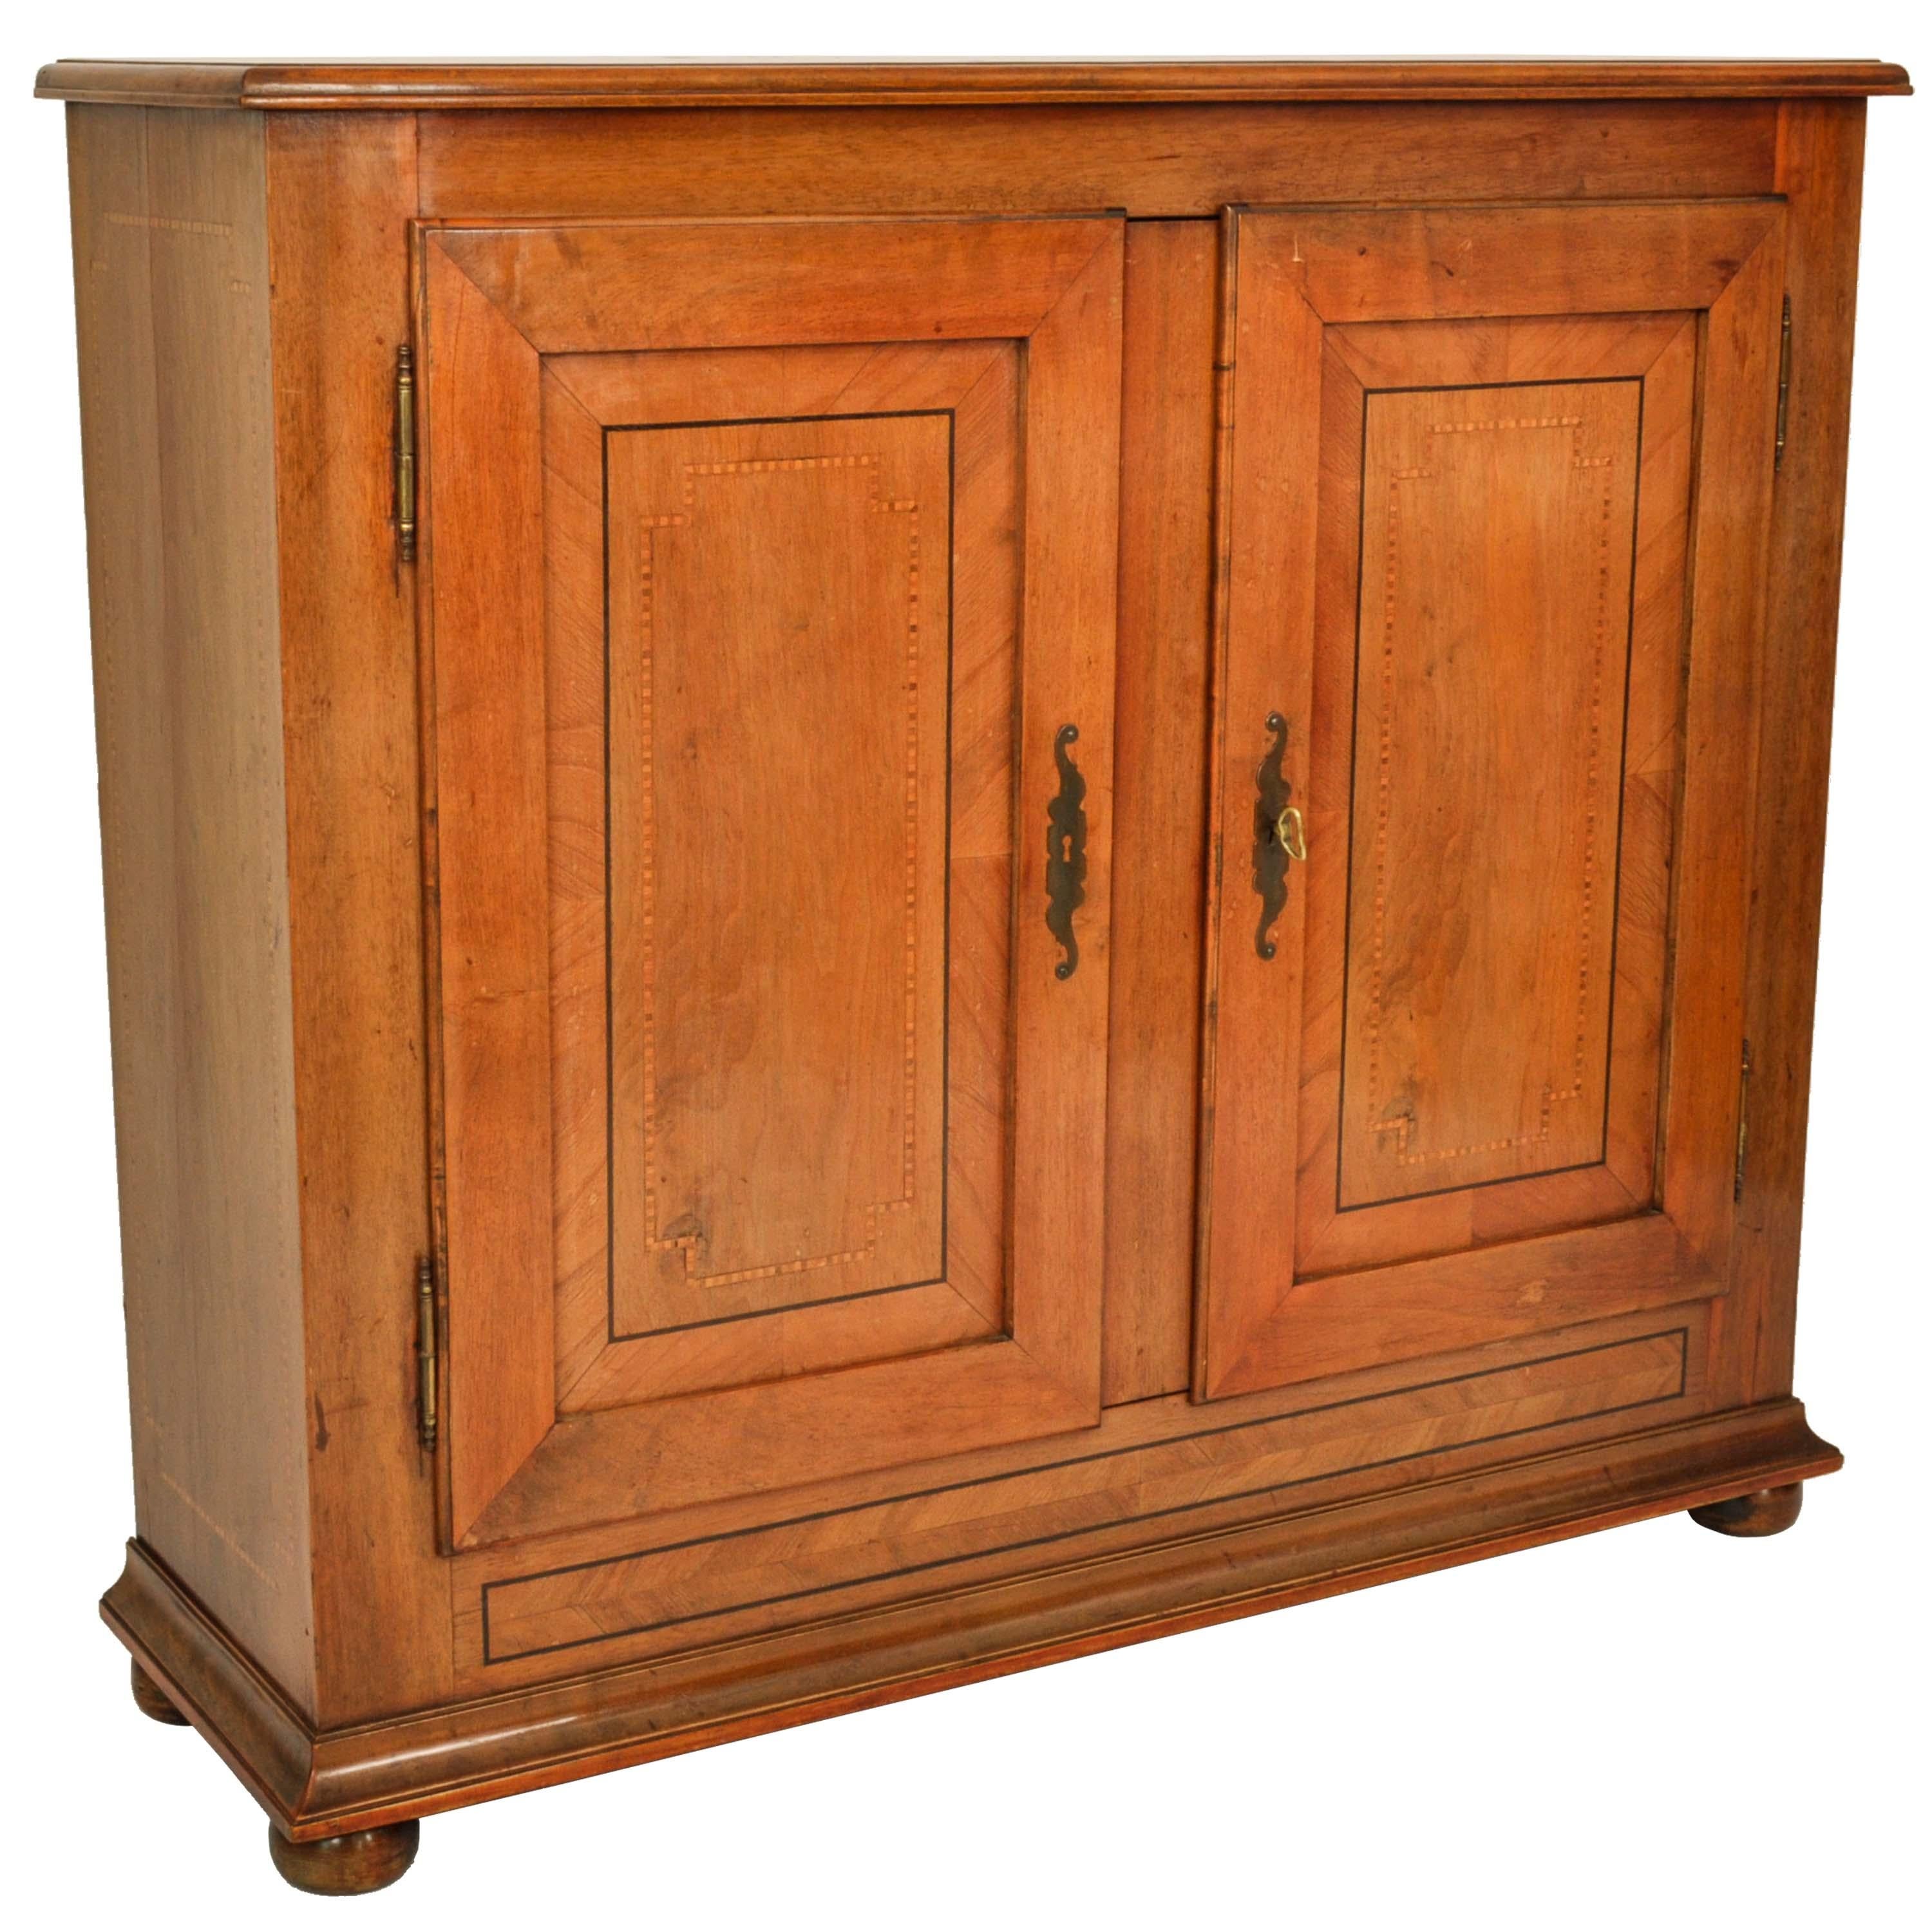 A handsome antique French Provincial inlaid cherry, Louis XV buffet, side cabinet, circa 1820.
The twin door cabinet of a very usable size and having chevron shaped inlaid bands on both the sides and the front of the cabinet. 
The twin fielded panel